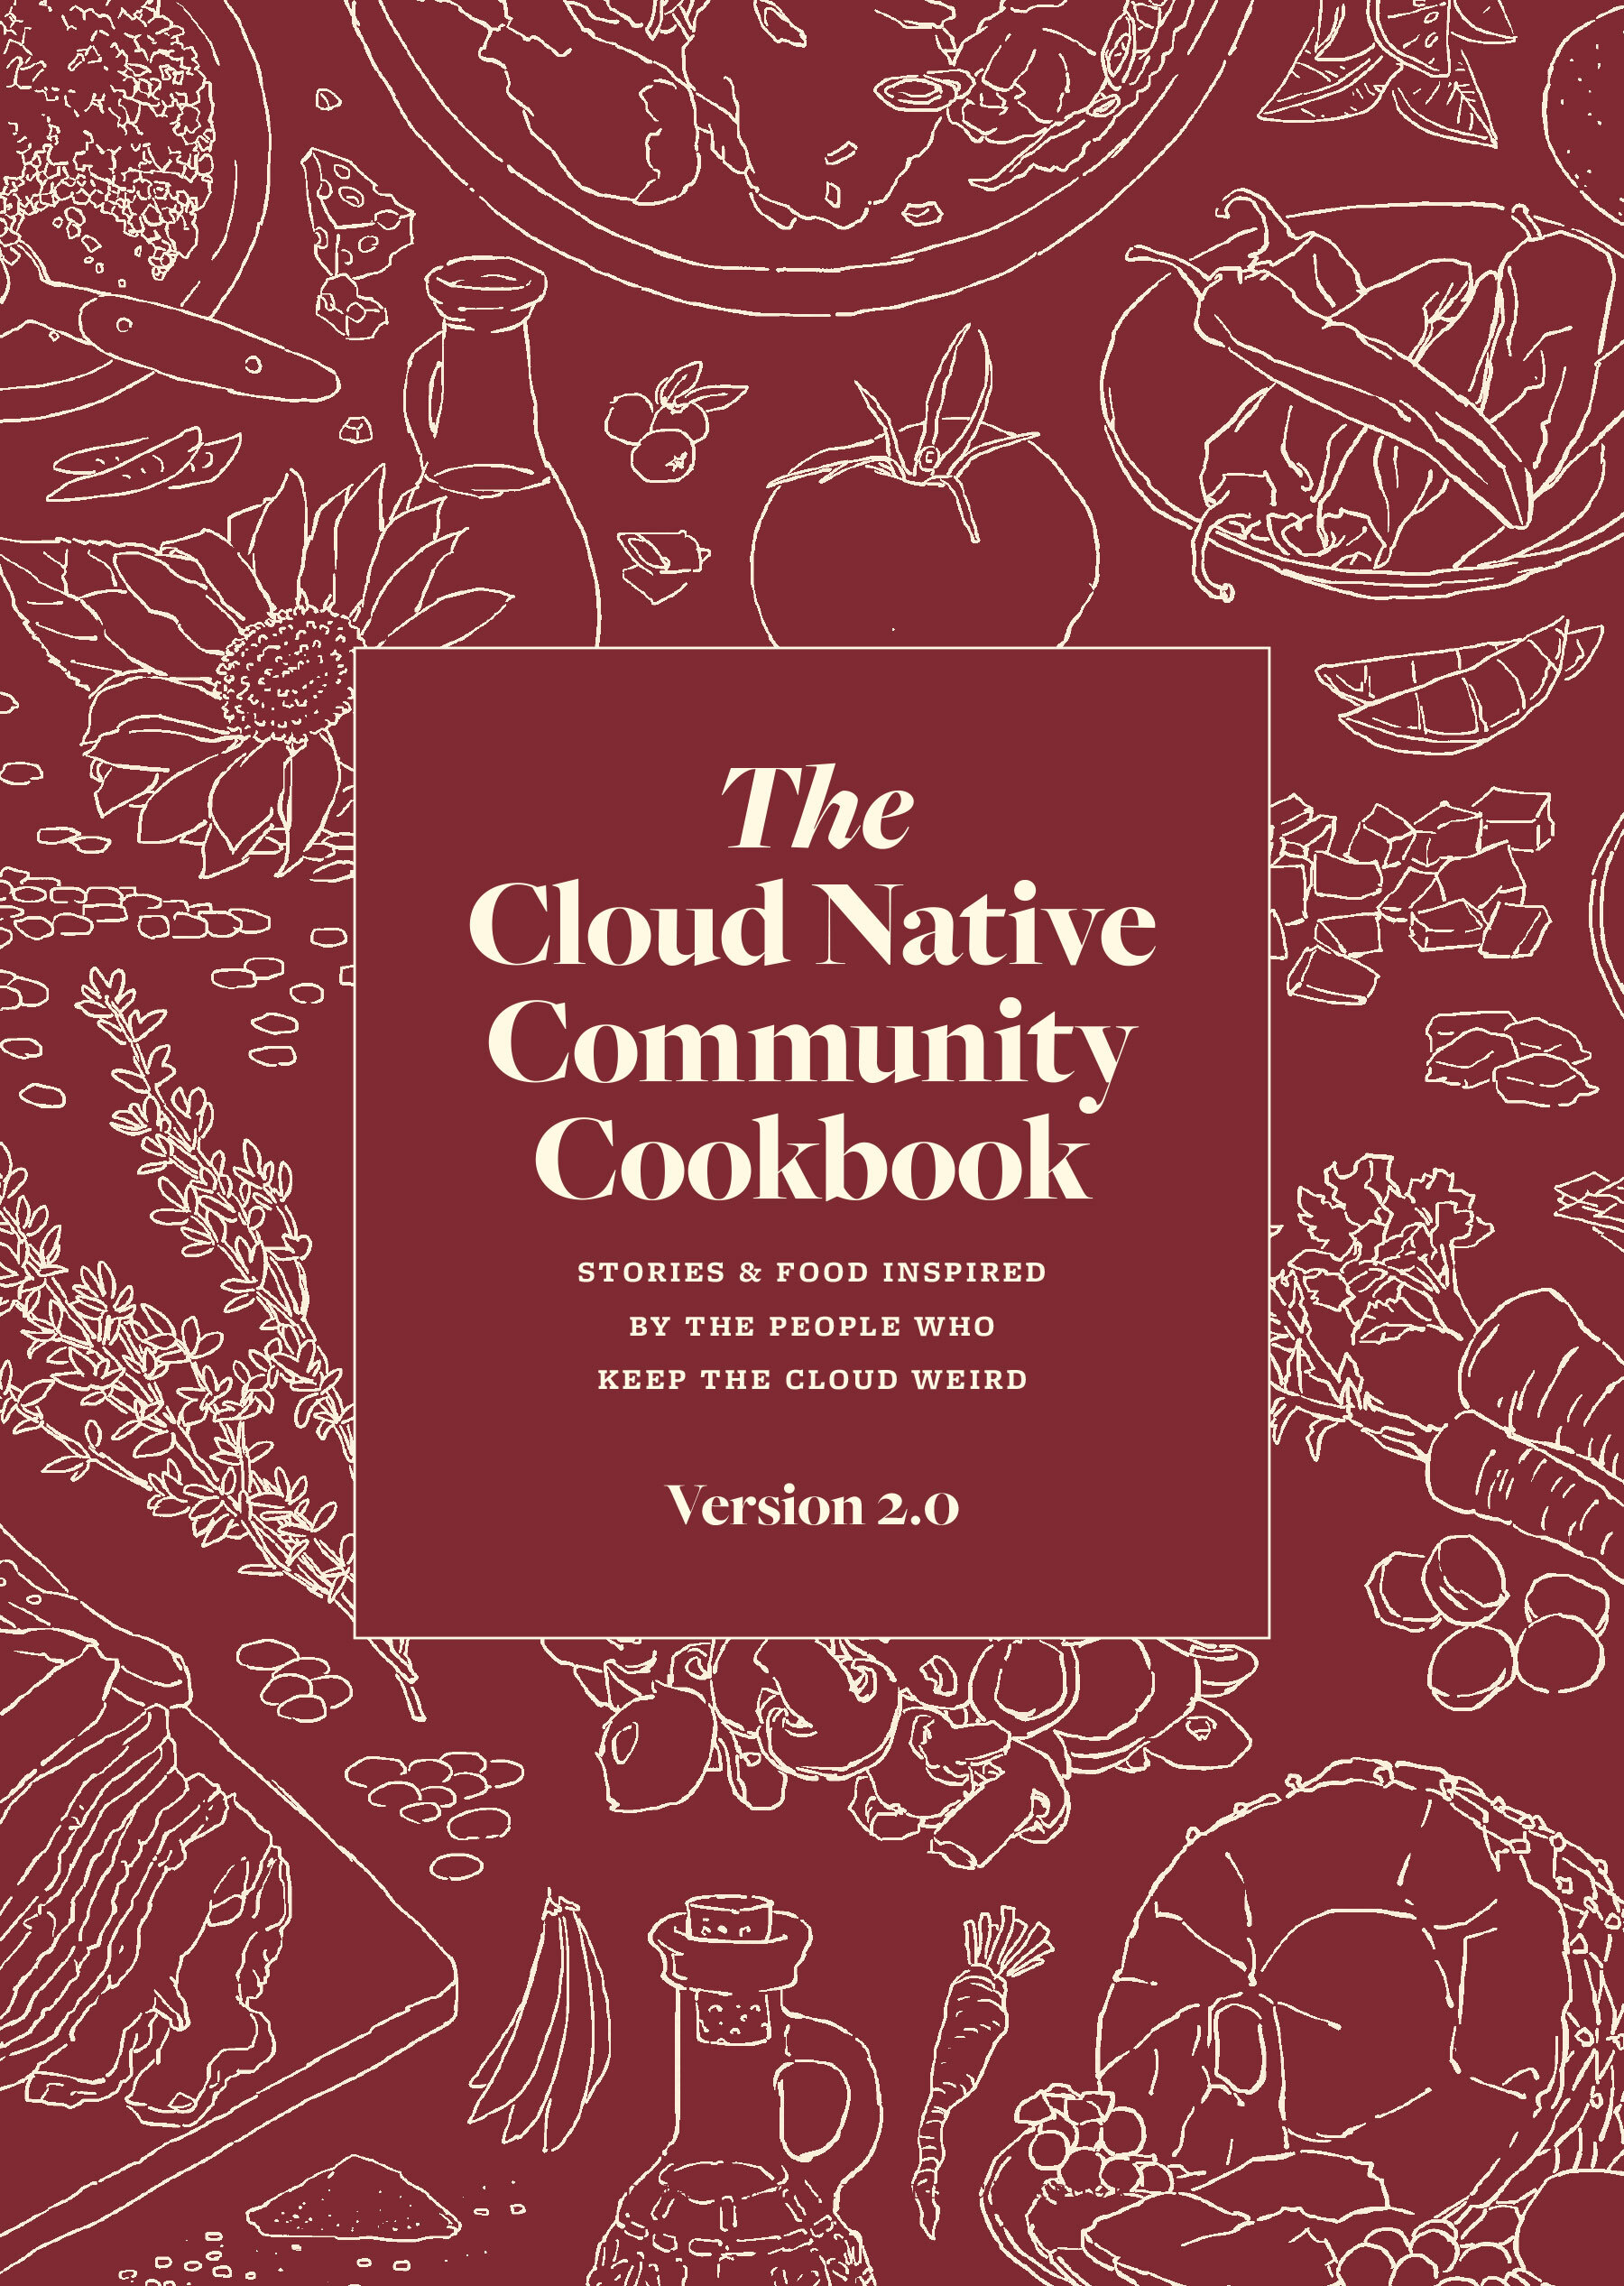 Cover image for the Cloud Native Community Cookbook version 2